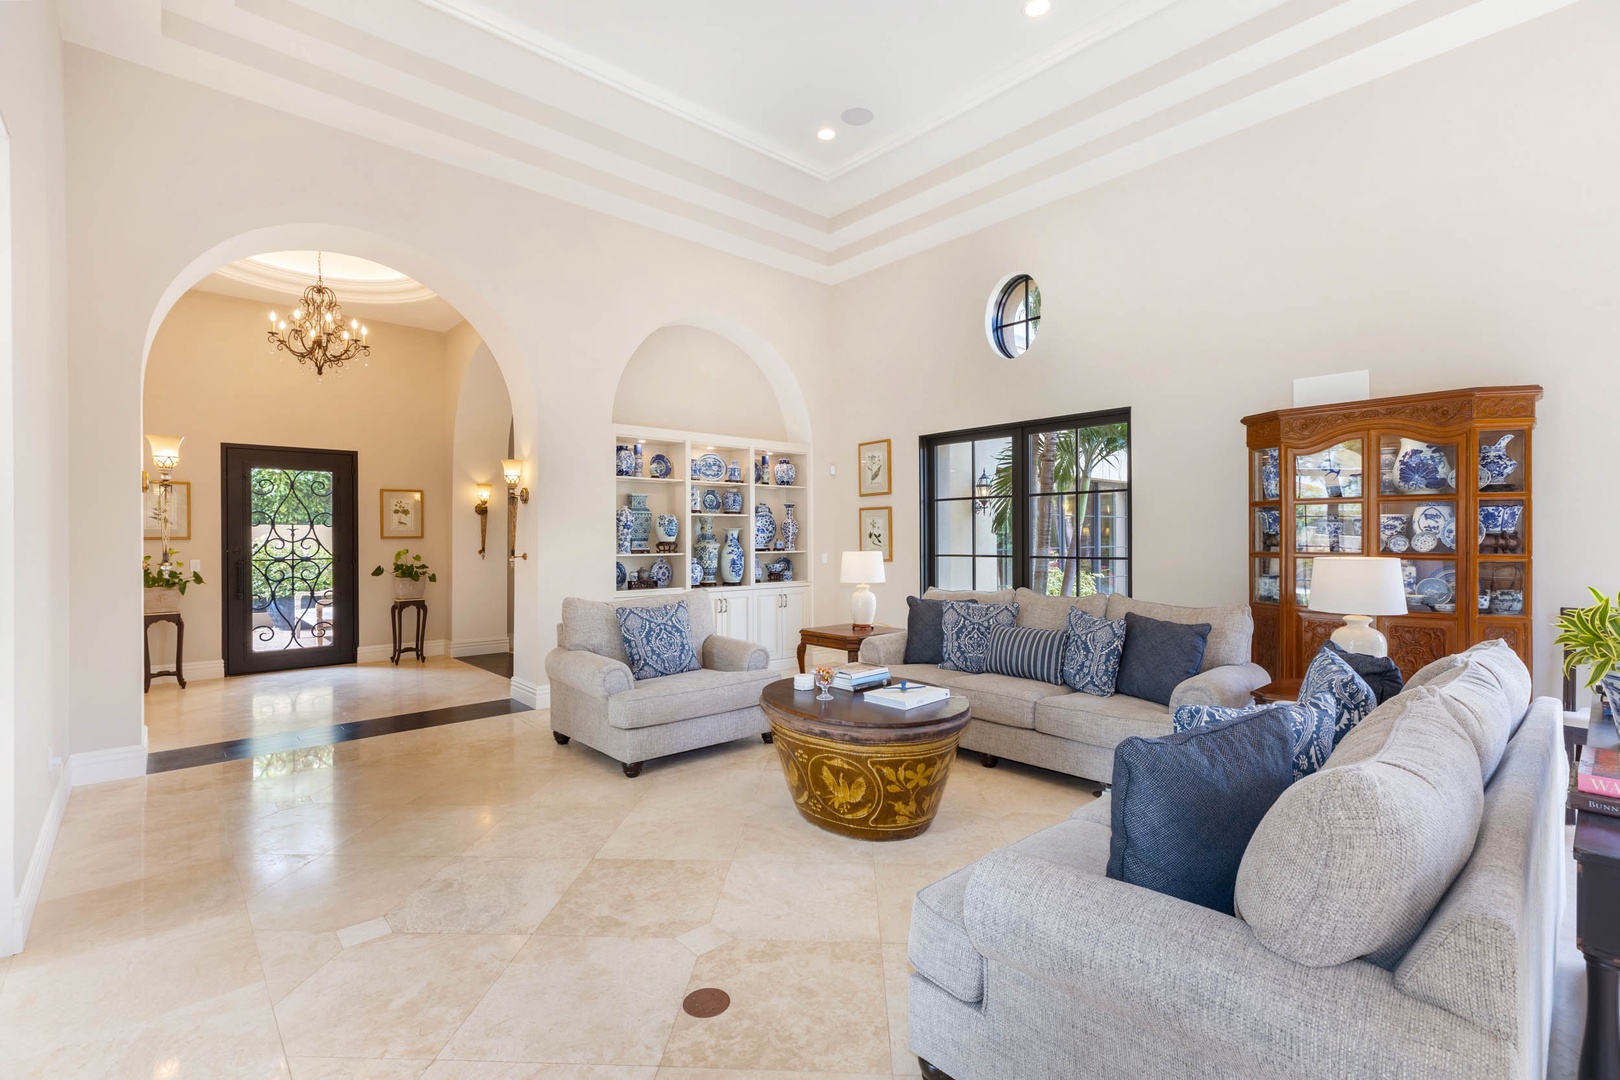 Honolulu Vacation Rentals, The Kahala Mansion - Comfortable seating, sophisticated décor, and soaring ceilings that amplify the sense of space and luxury.